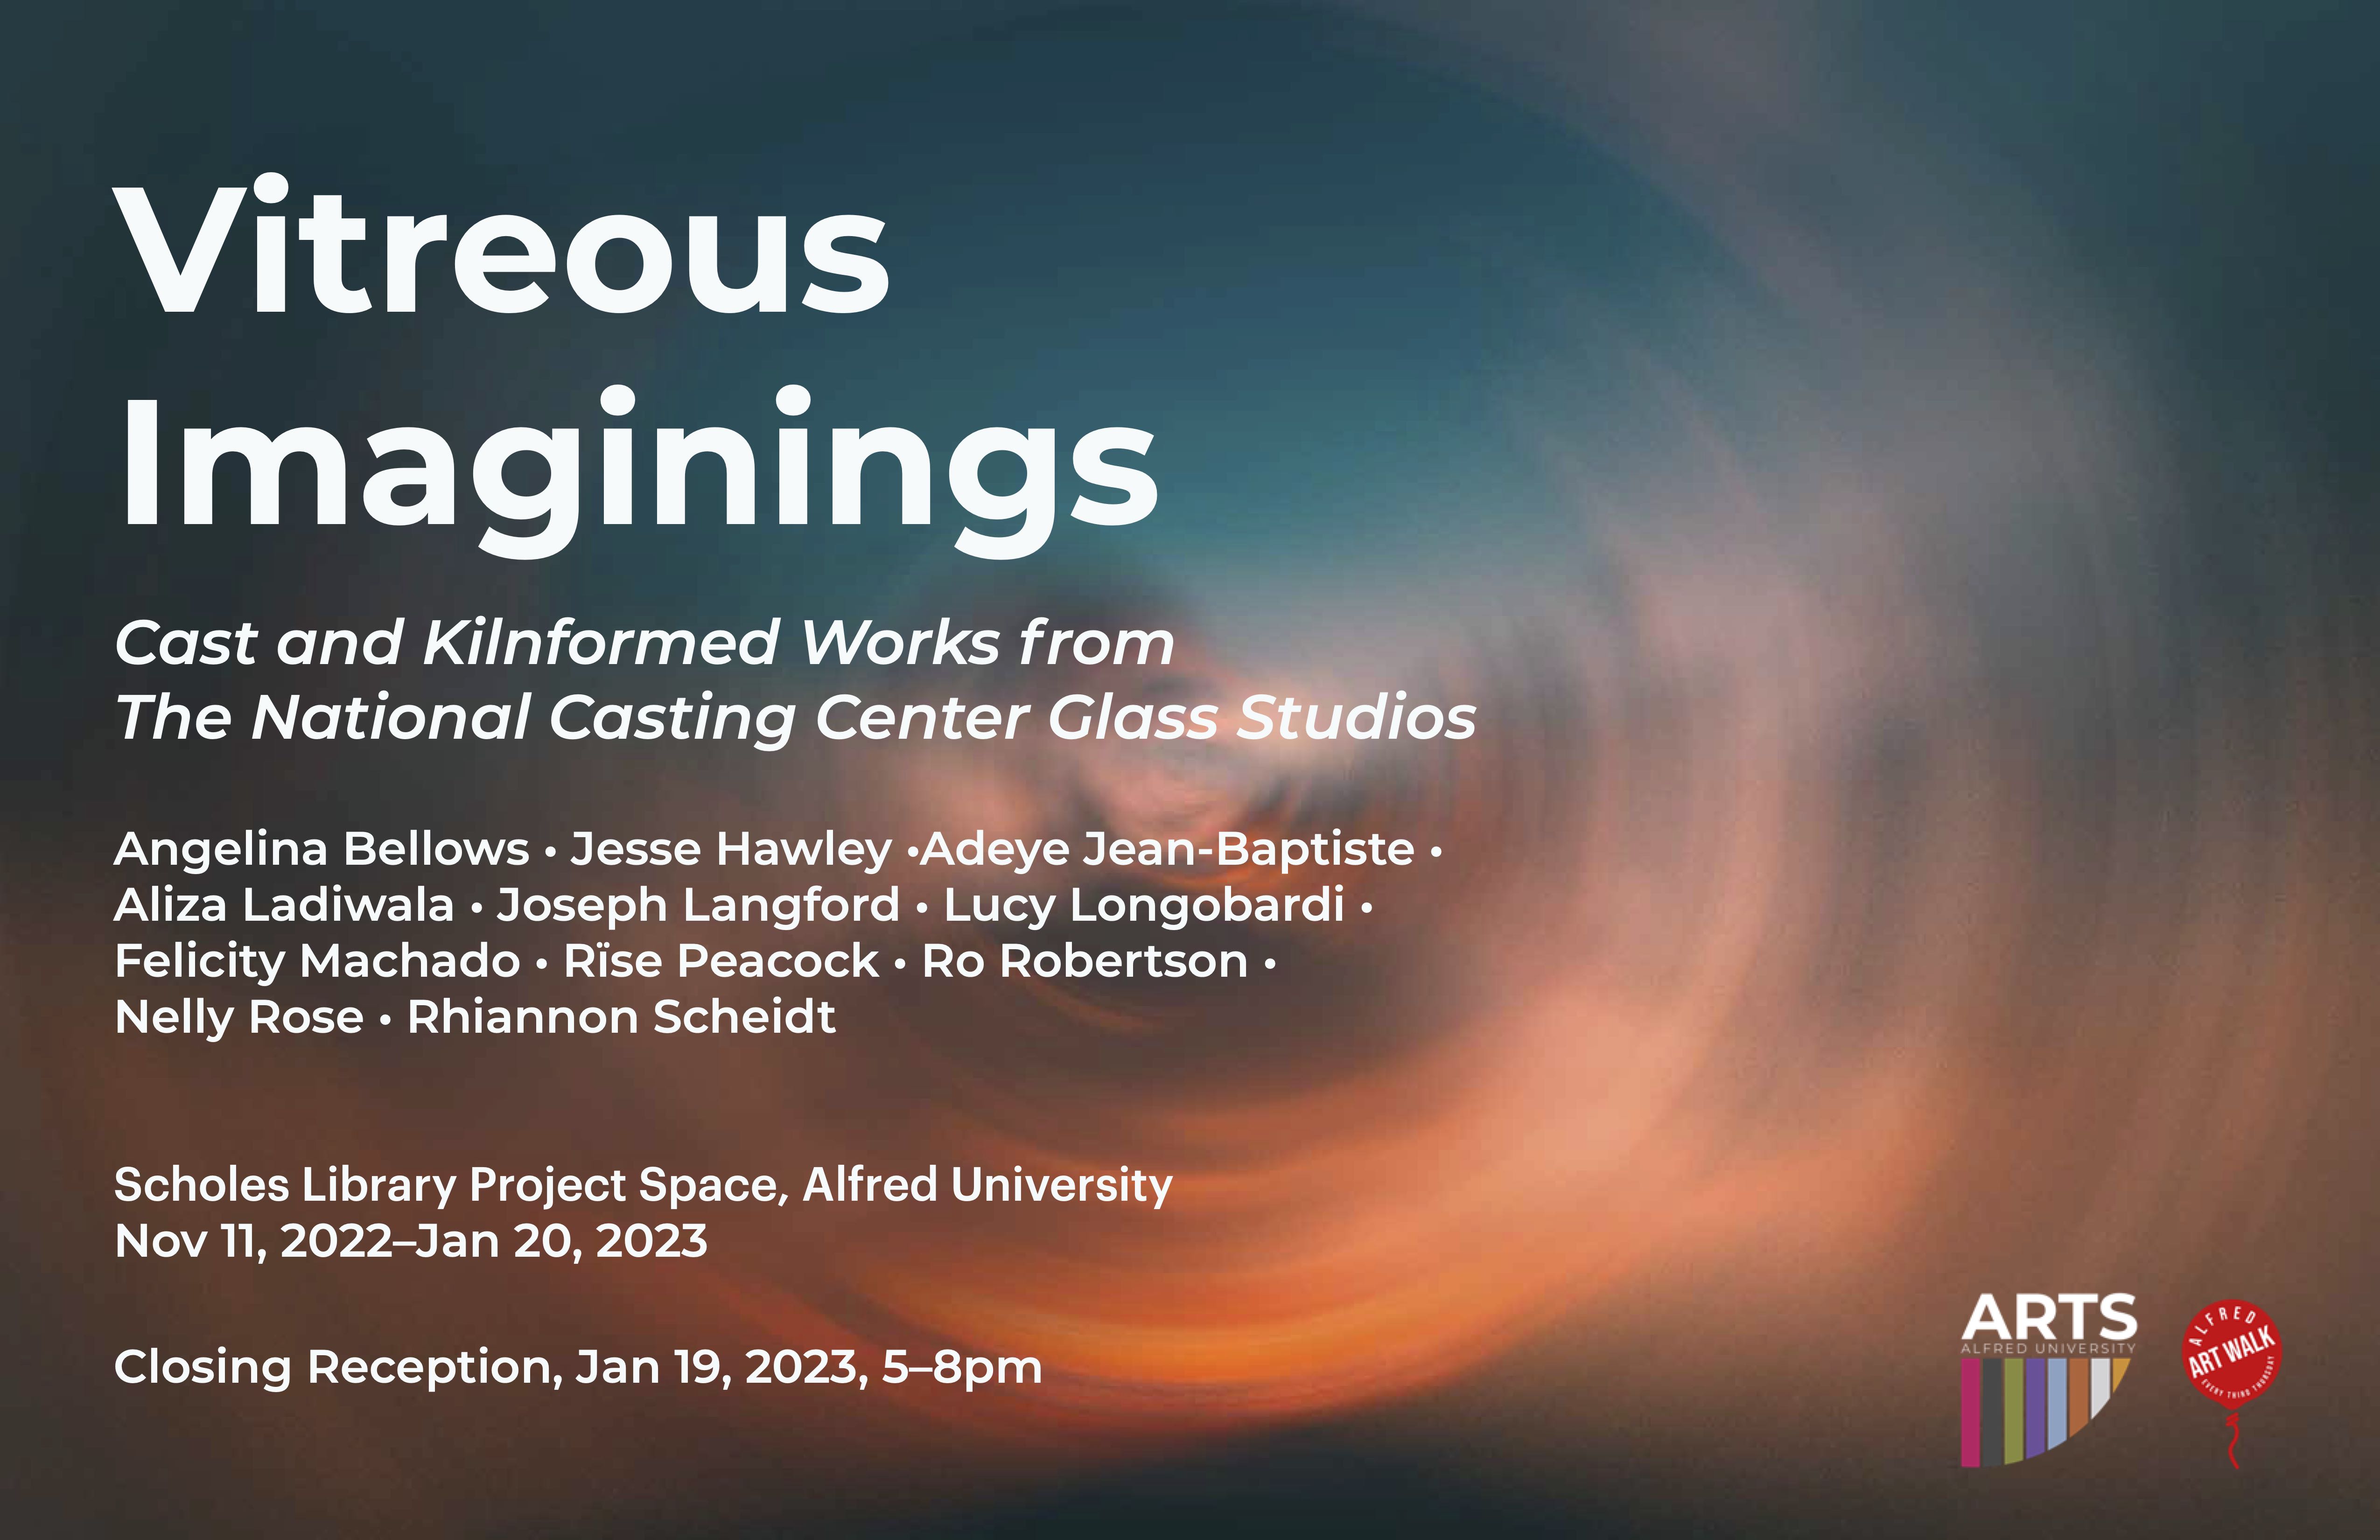 vitreous imaginings exhibition poster